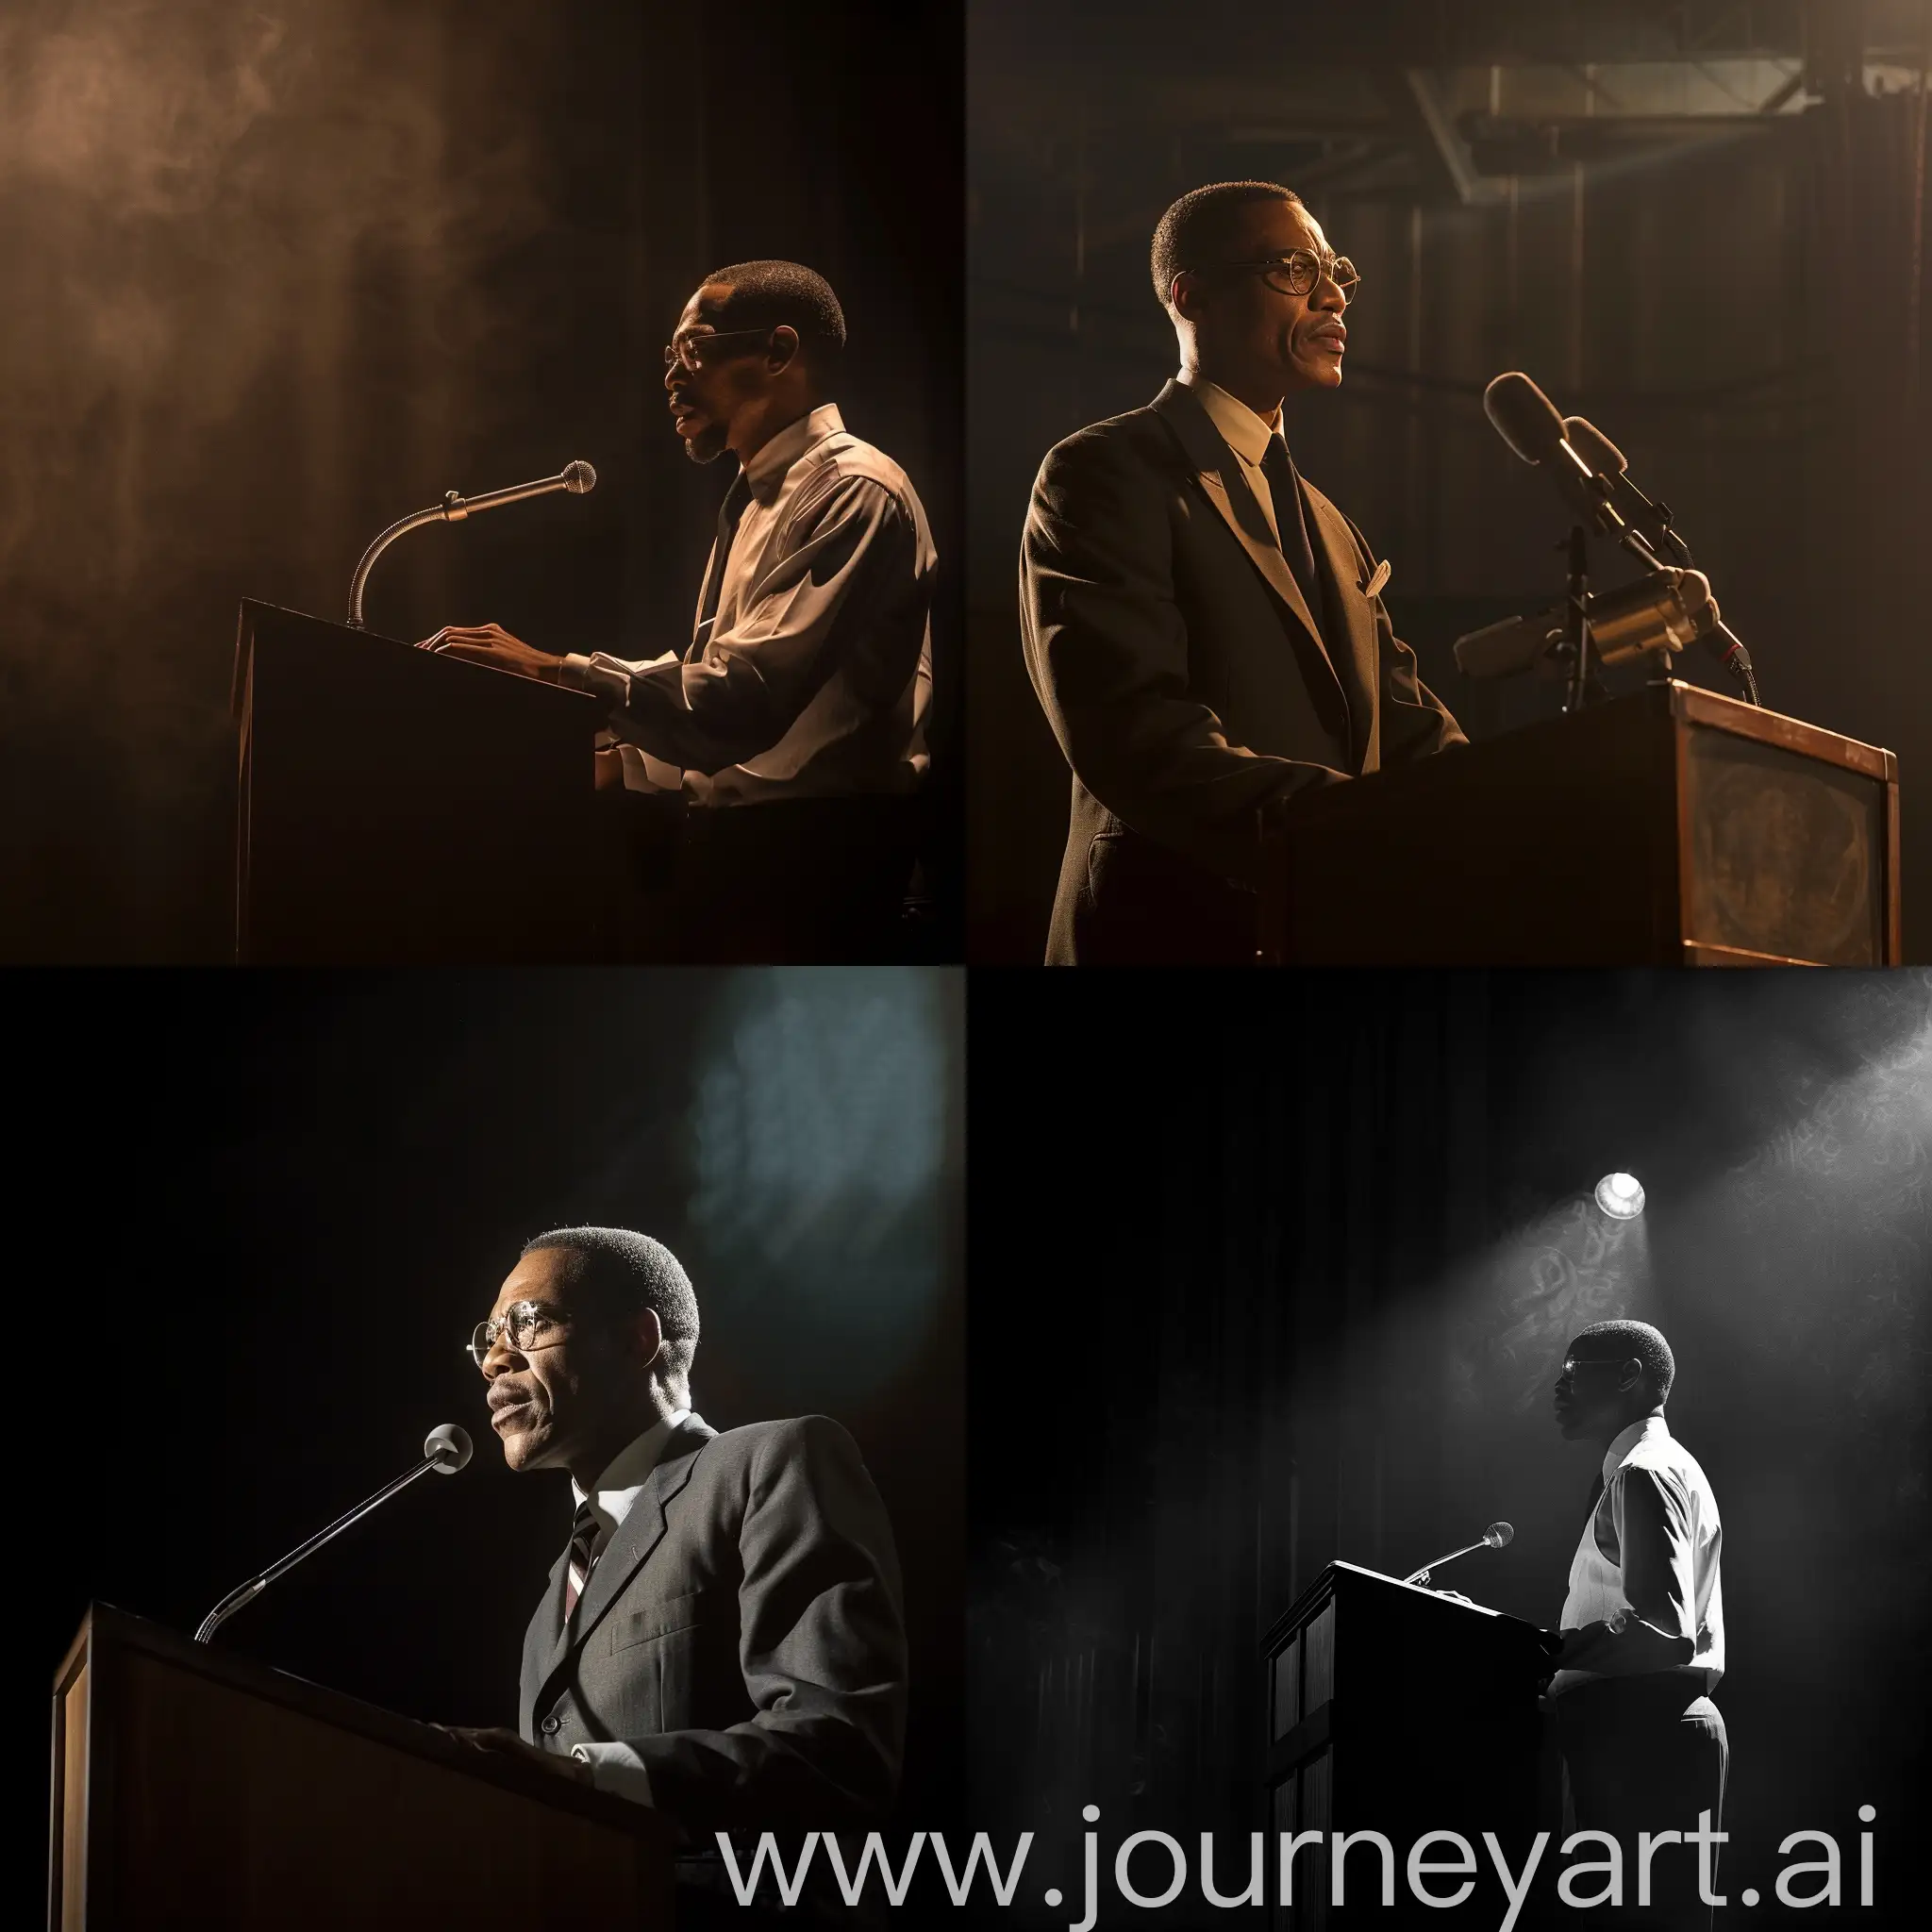 Malcolm-X-delivering-powerful-speech-at-lectern-with-cinematic-lighting